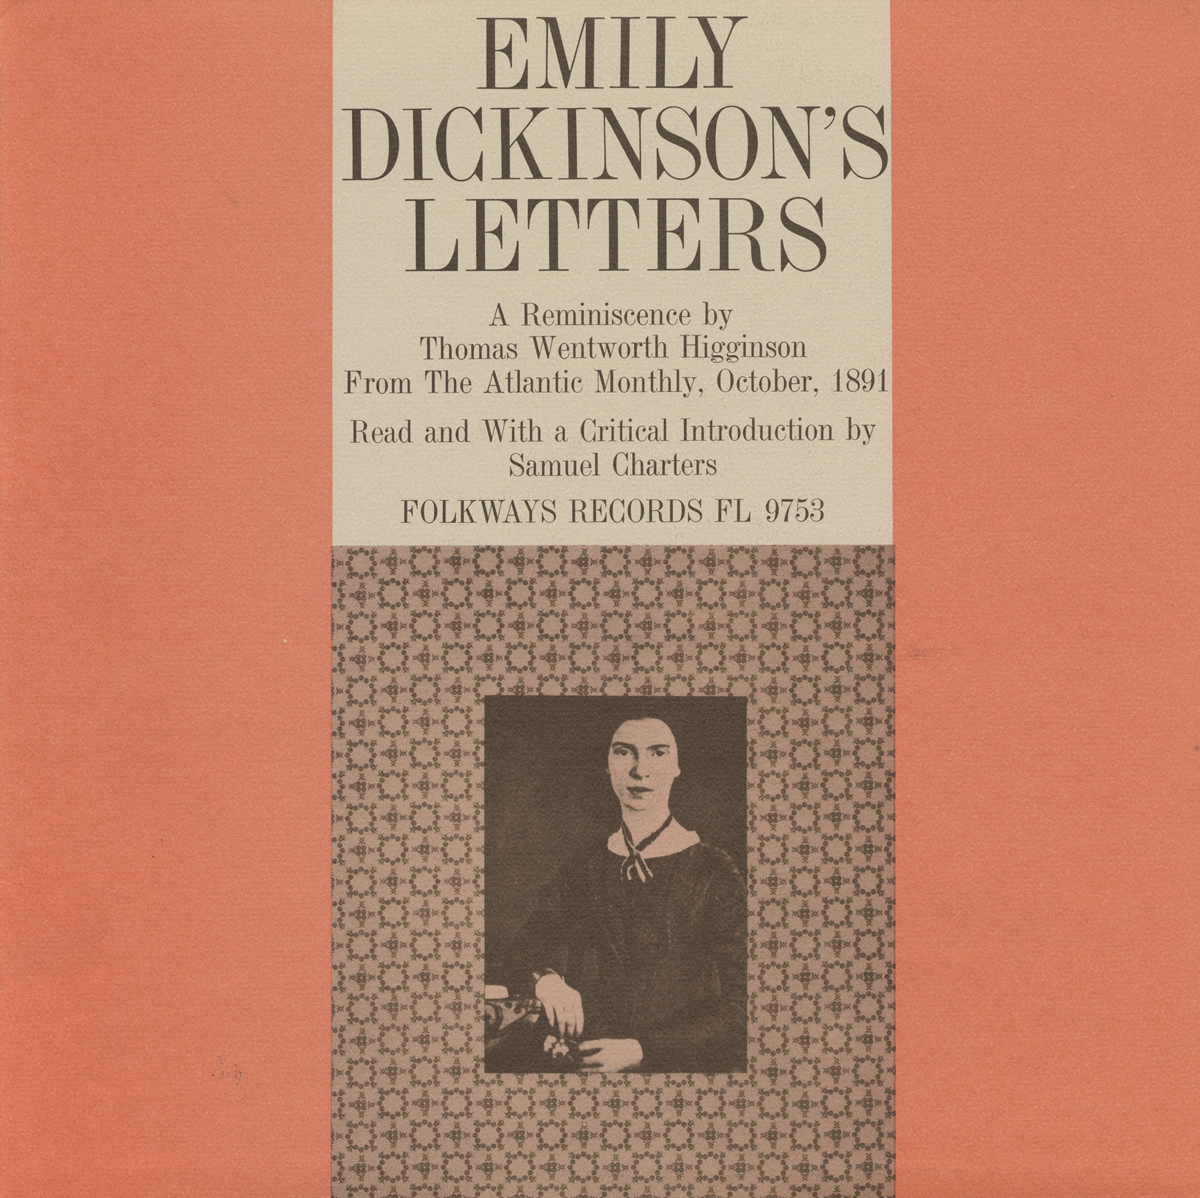 THE LETTERS OF EMILY DICKINSON: A REMINISCENCE